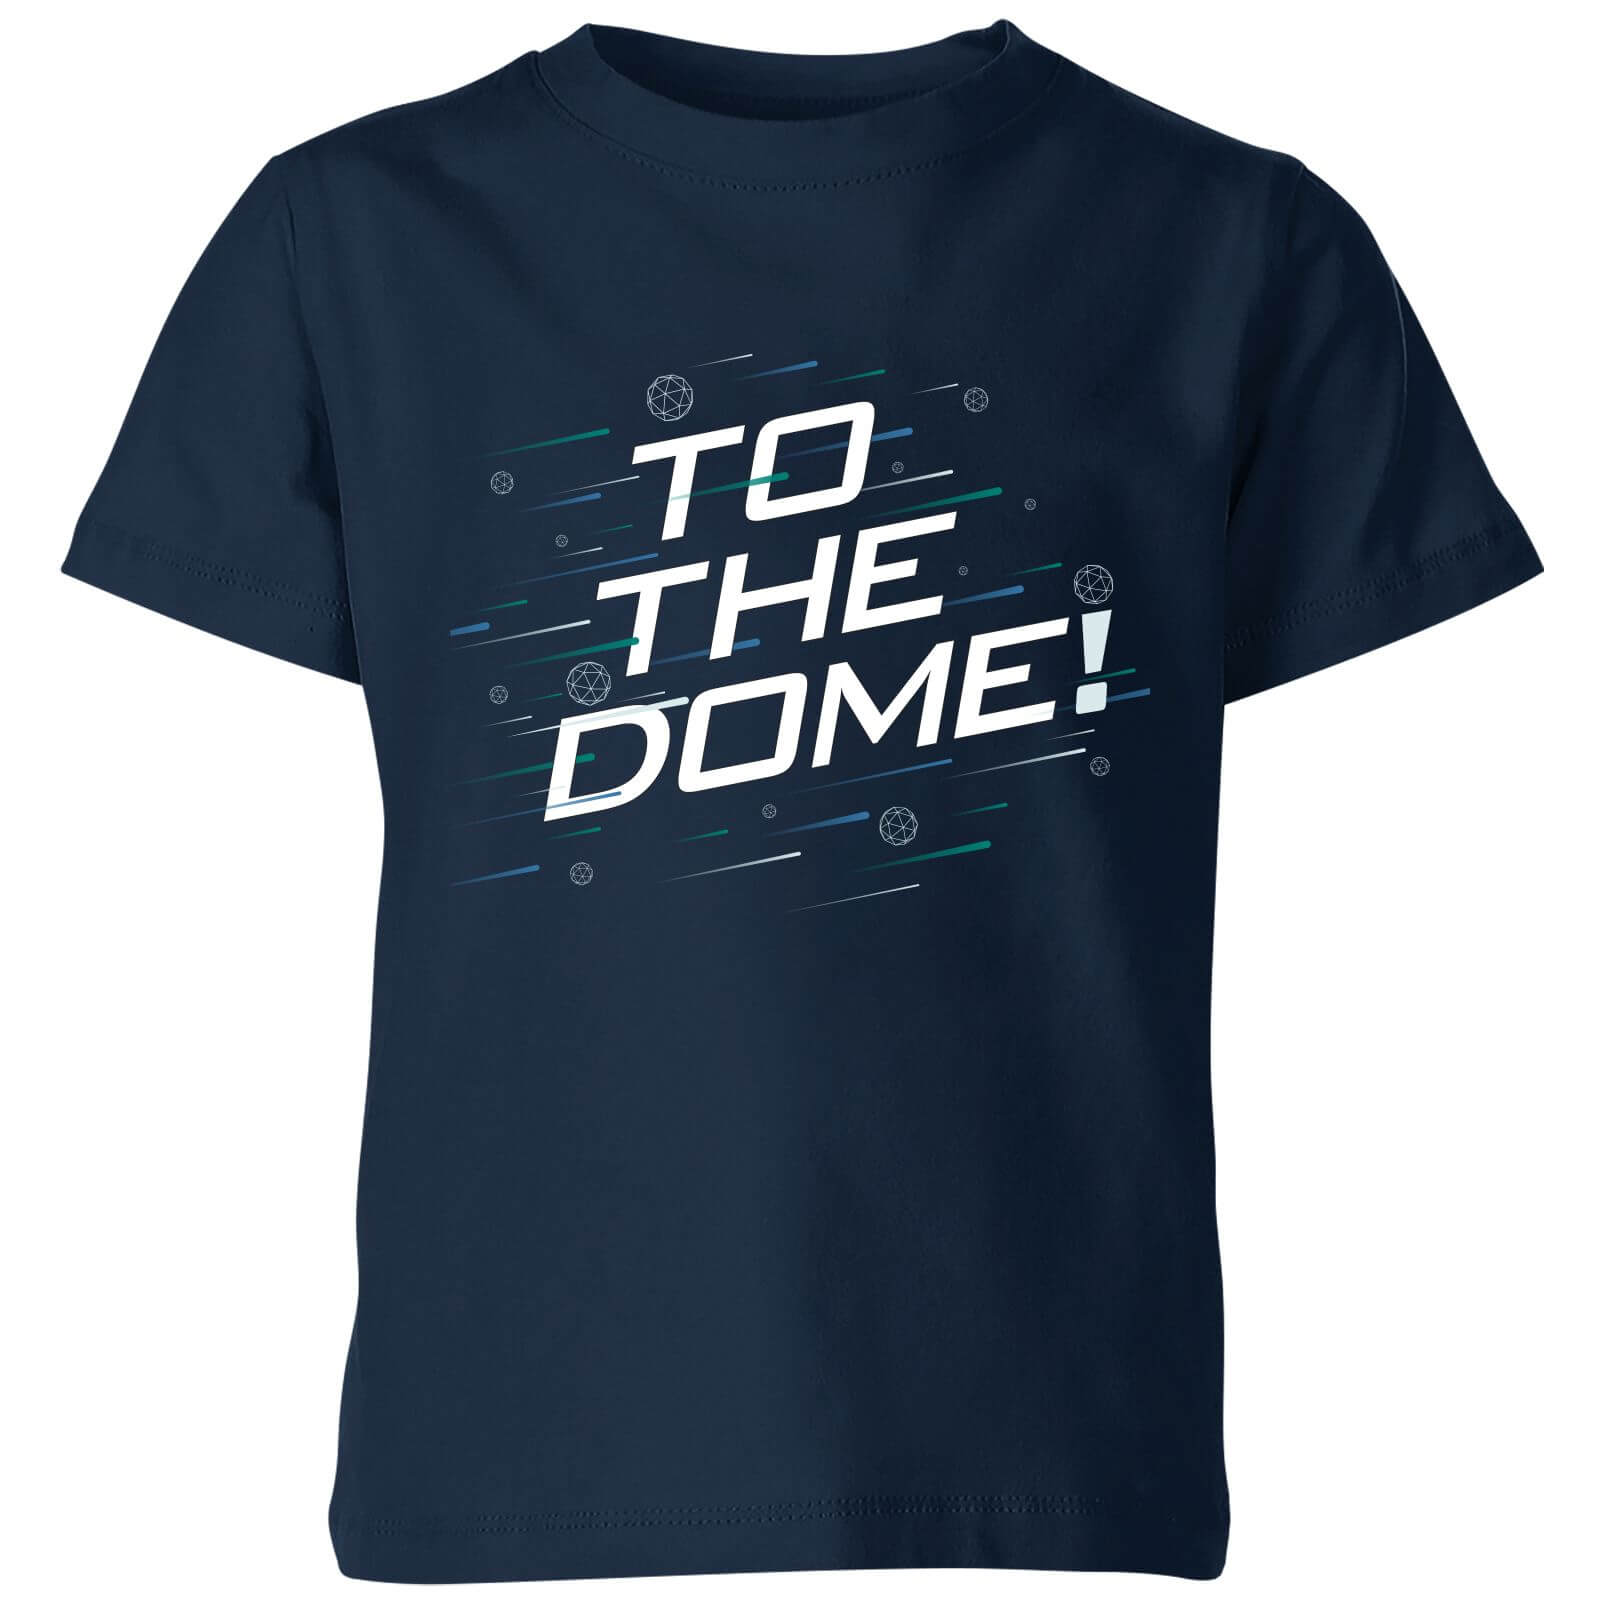 Crystal Maze To The Dome! Kids' T-Shirt - Navy - 3-4 Years - Navy